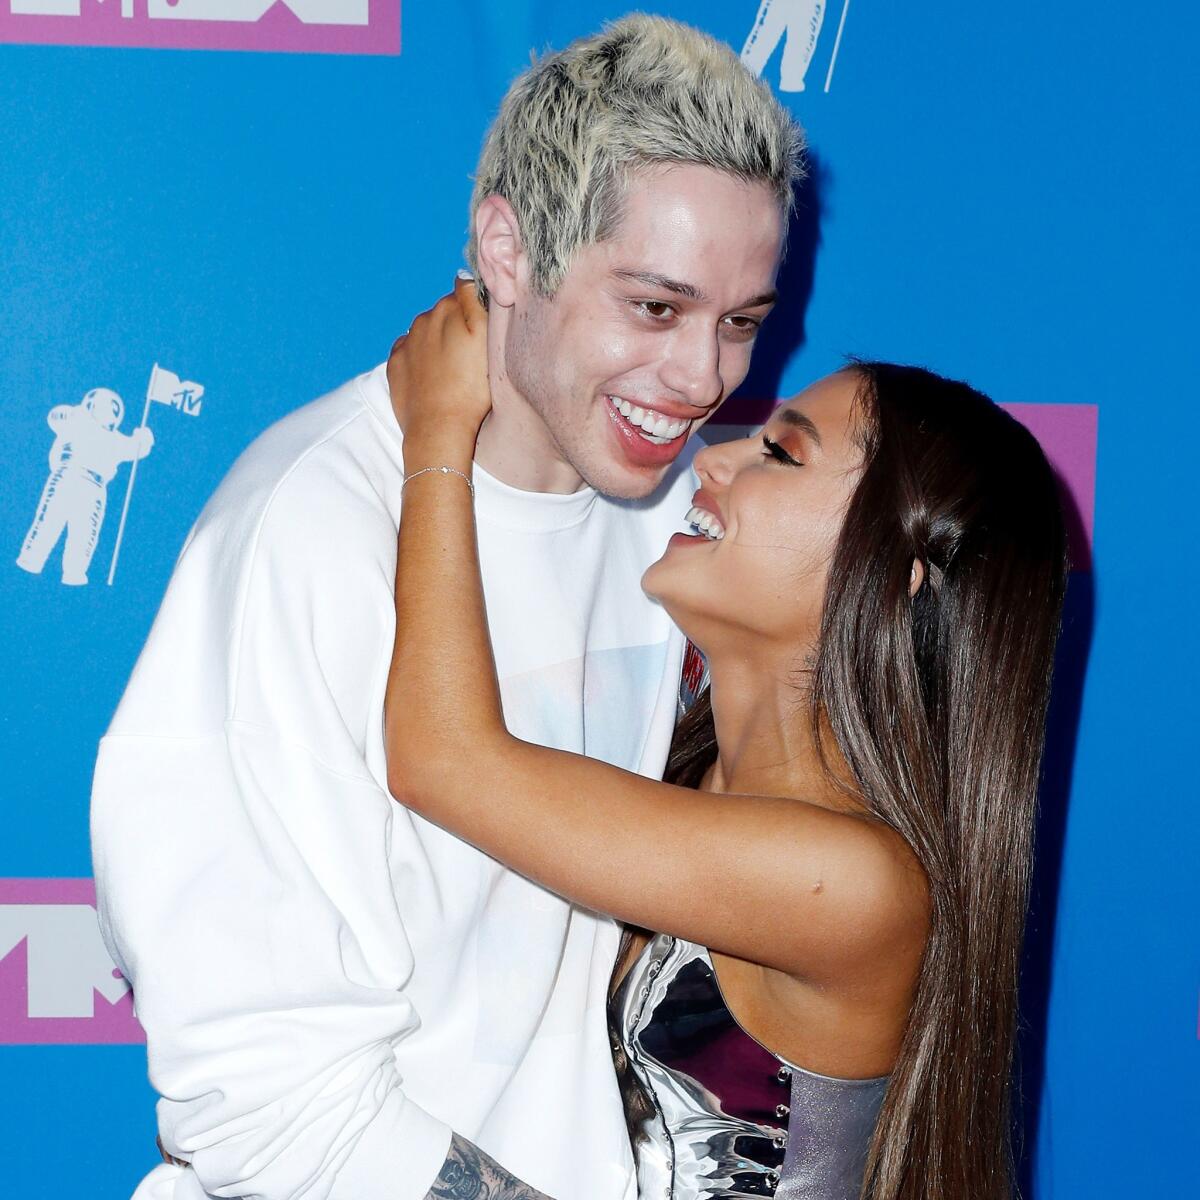 Pete Davidson and Ariana Grande have reportedly broken up.